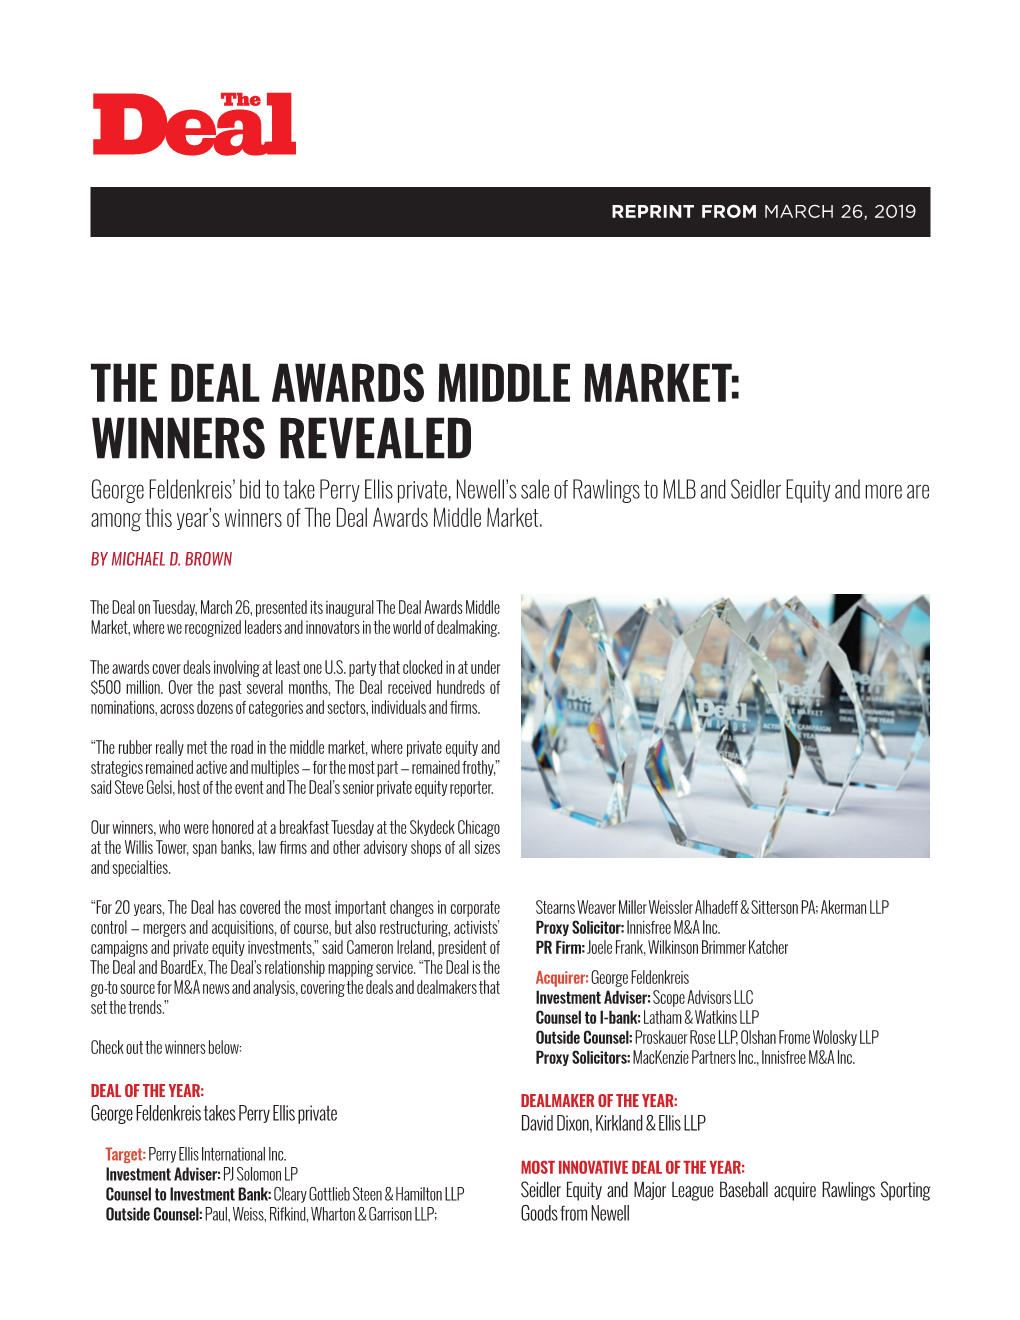 The Deal Awards Middle Market